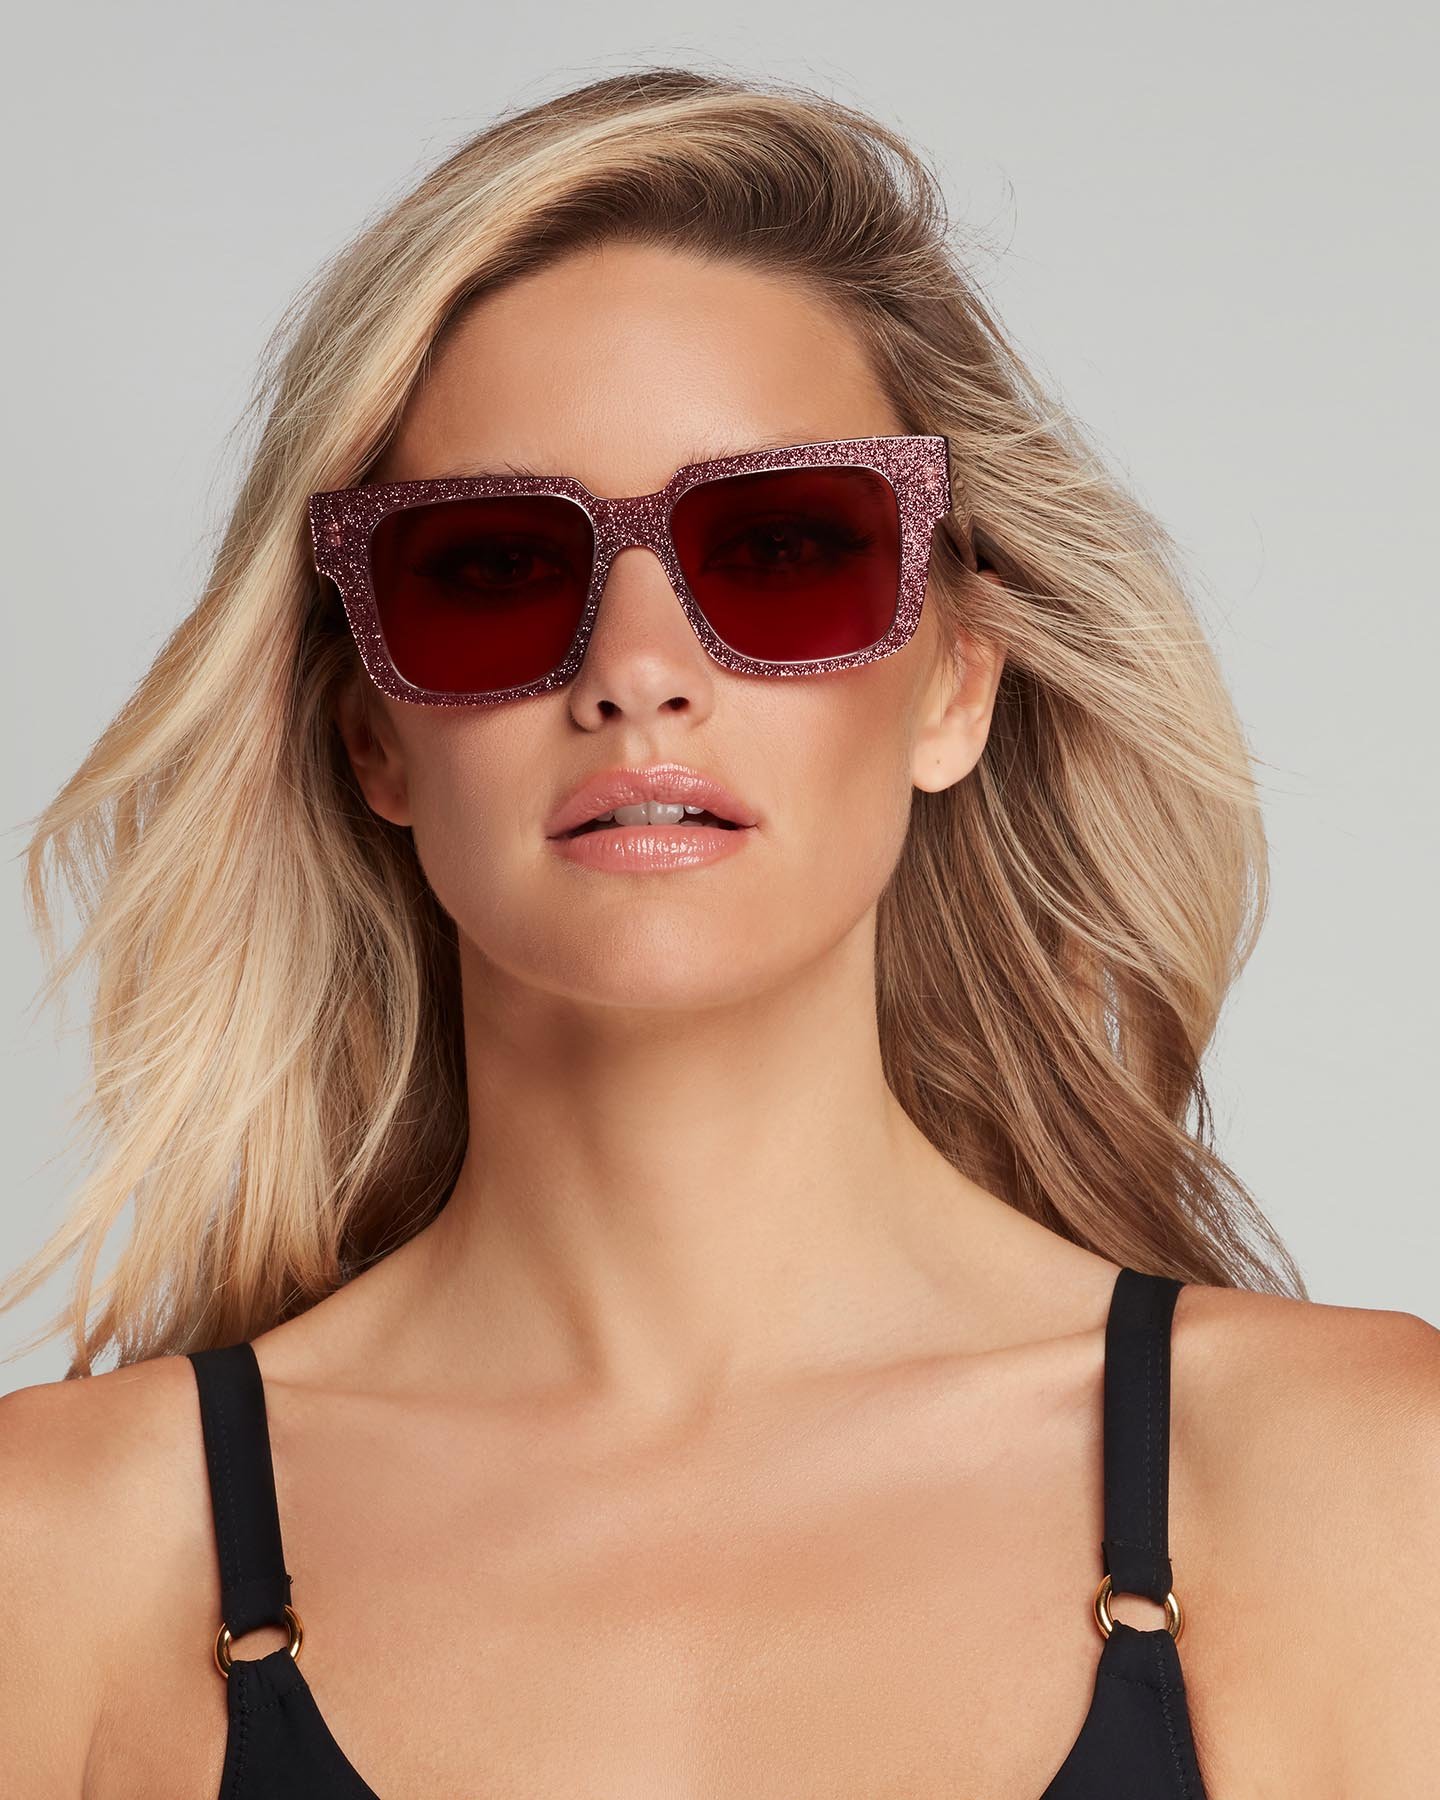 Sunglasses | By Agent Provocateur All